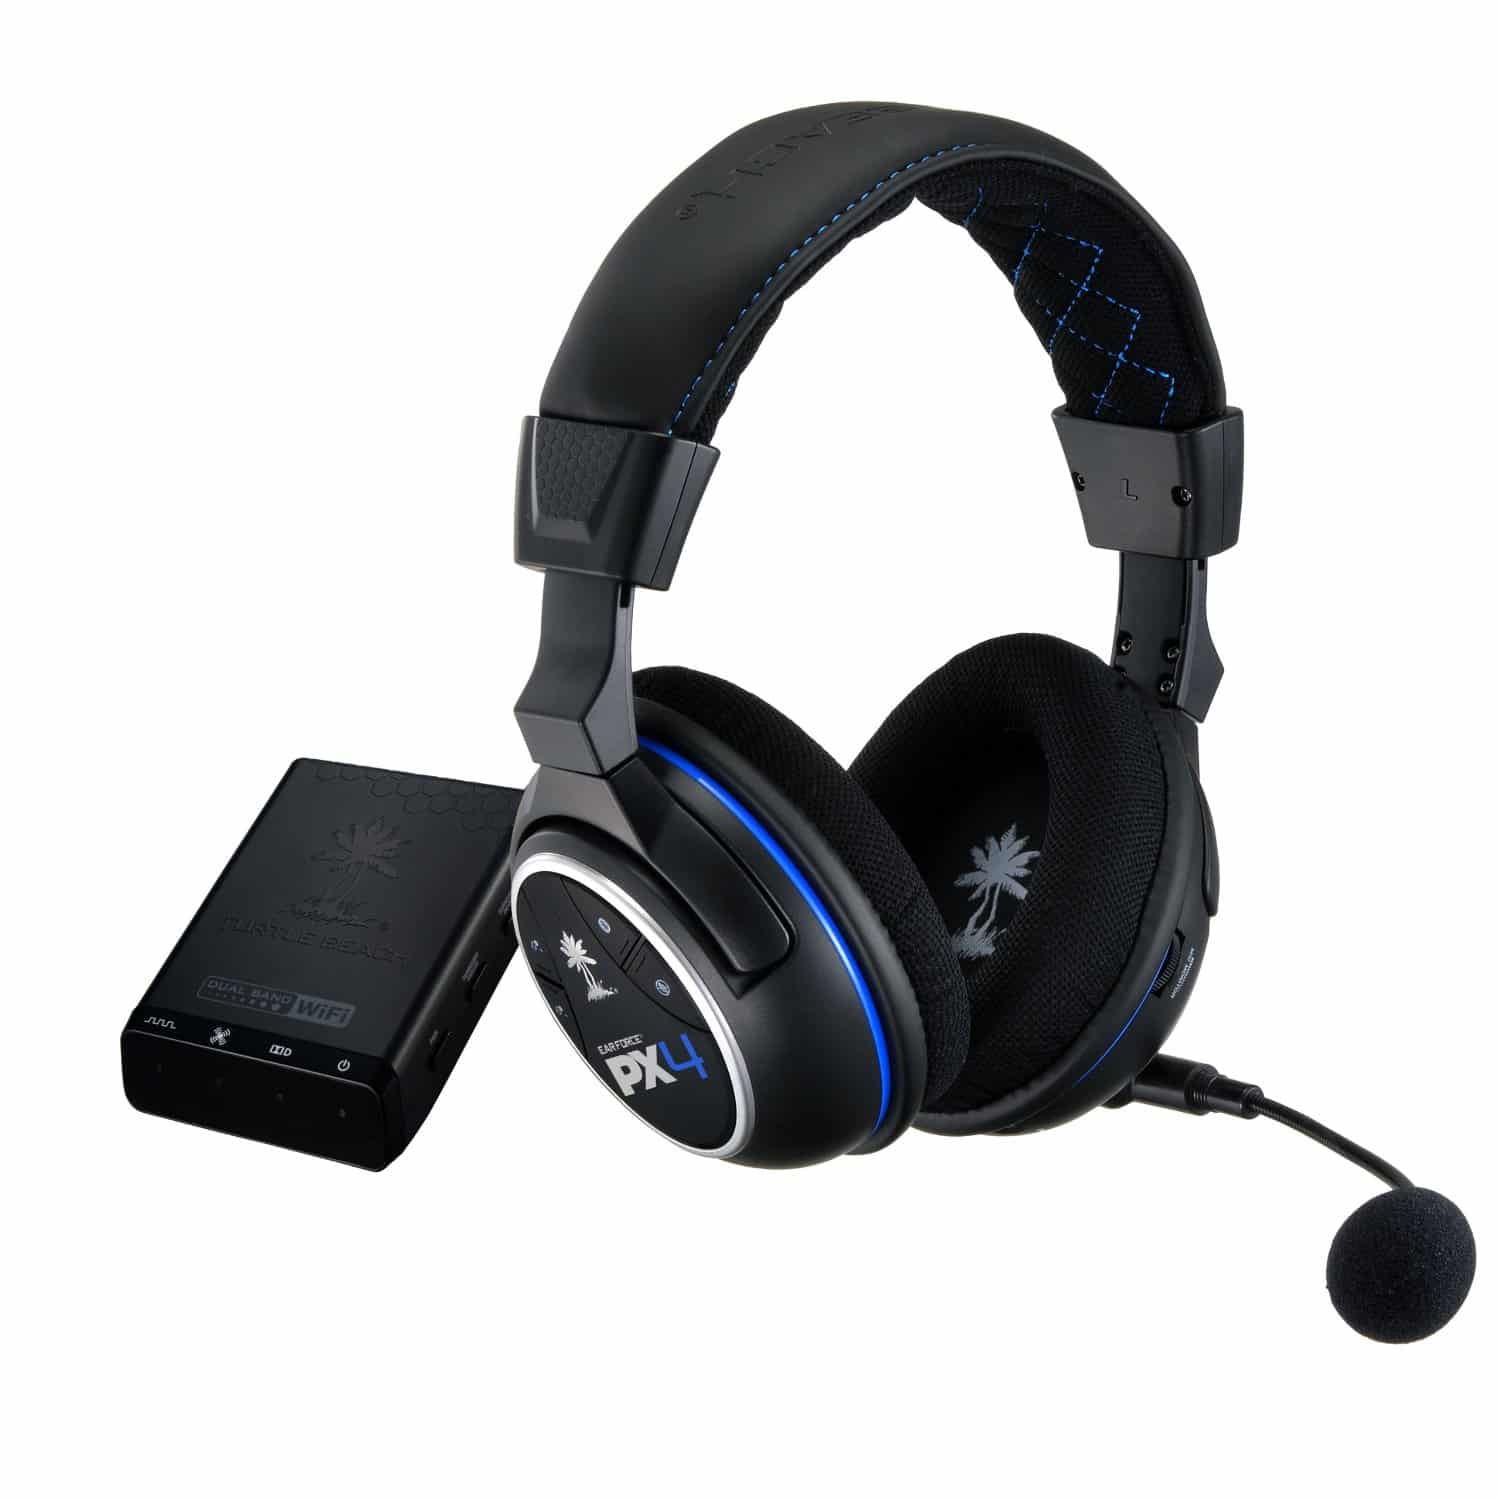 Top Station Headsets Reviews â Reviews of PS4 Headsets